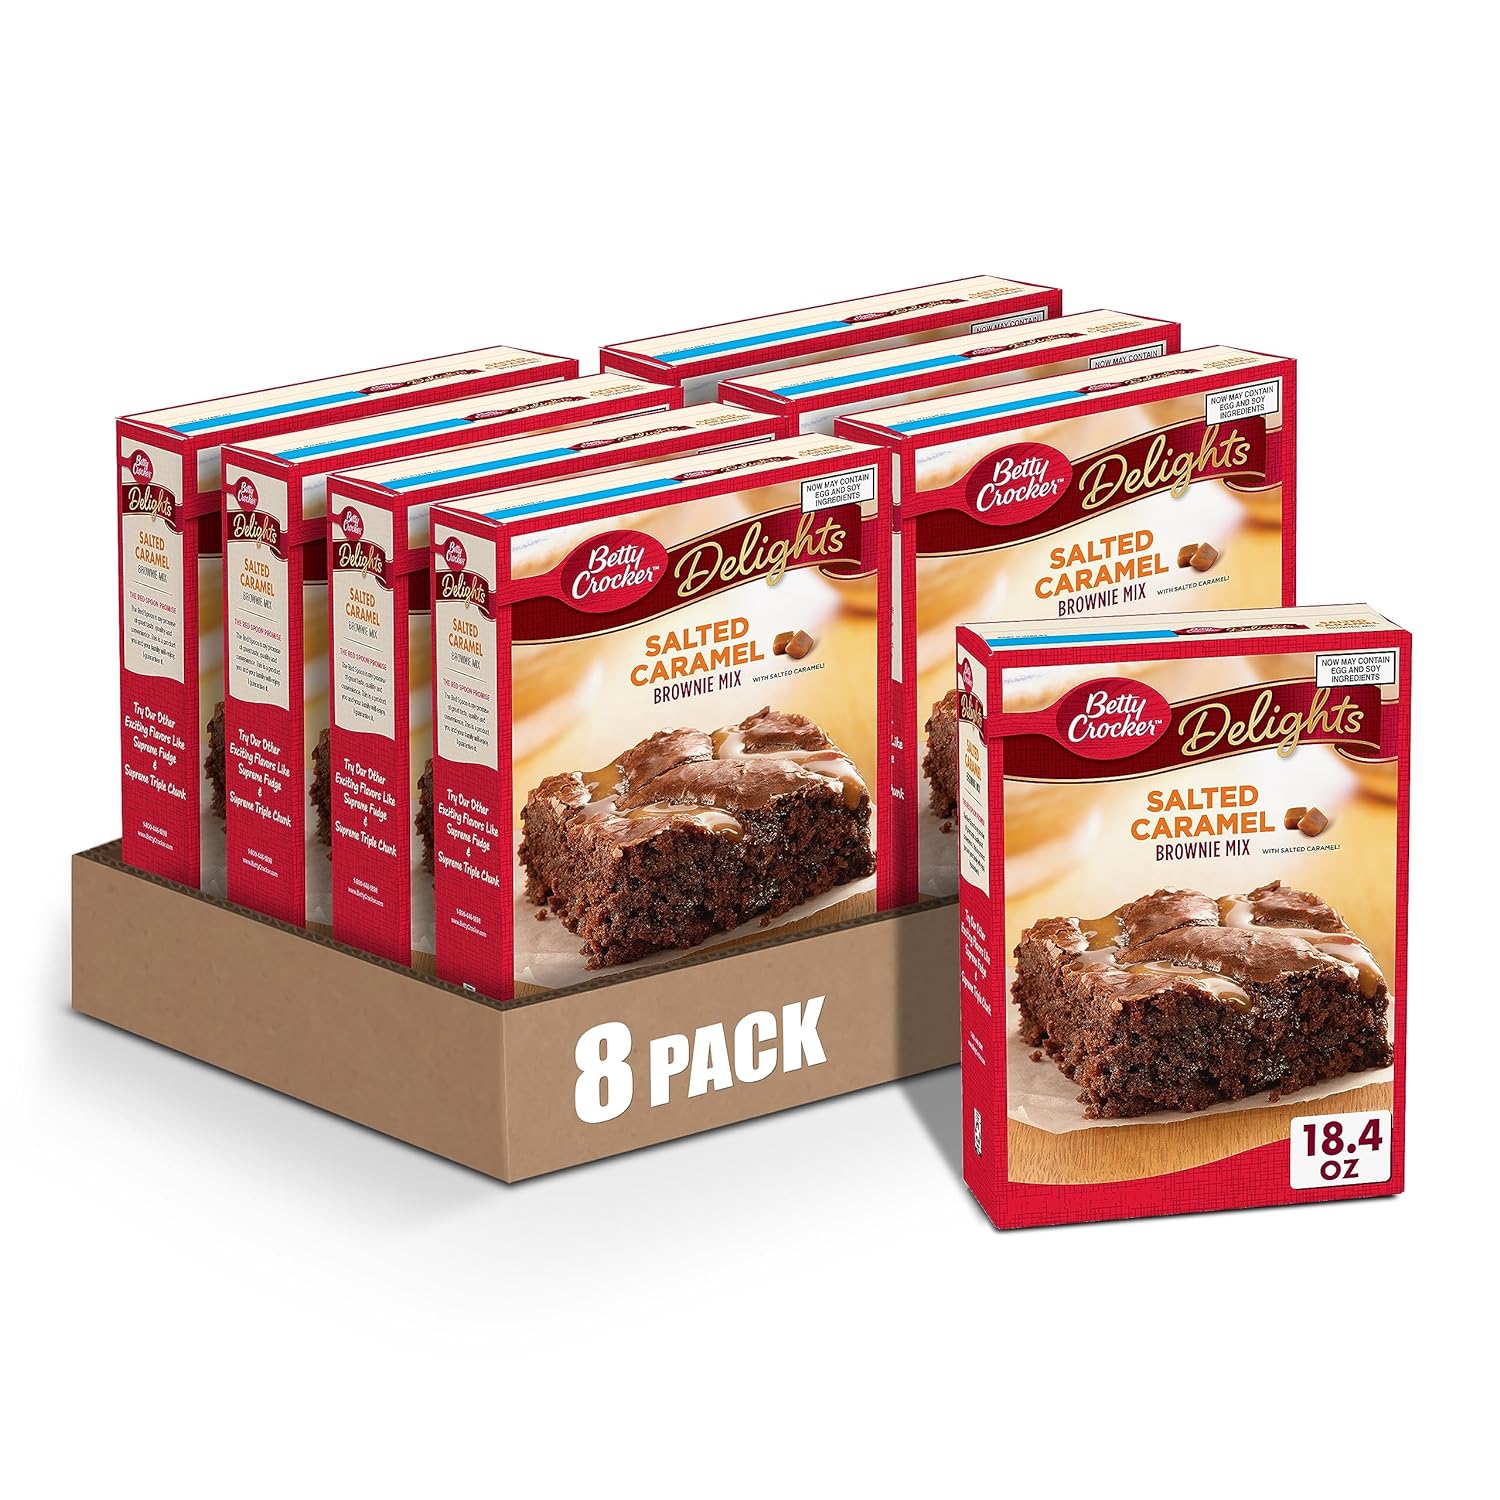 Betty Crocker Delights Salted Caramel Brownie Mix, 18.4 oz. (Pack of 8)